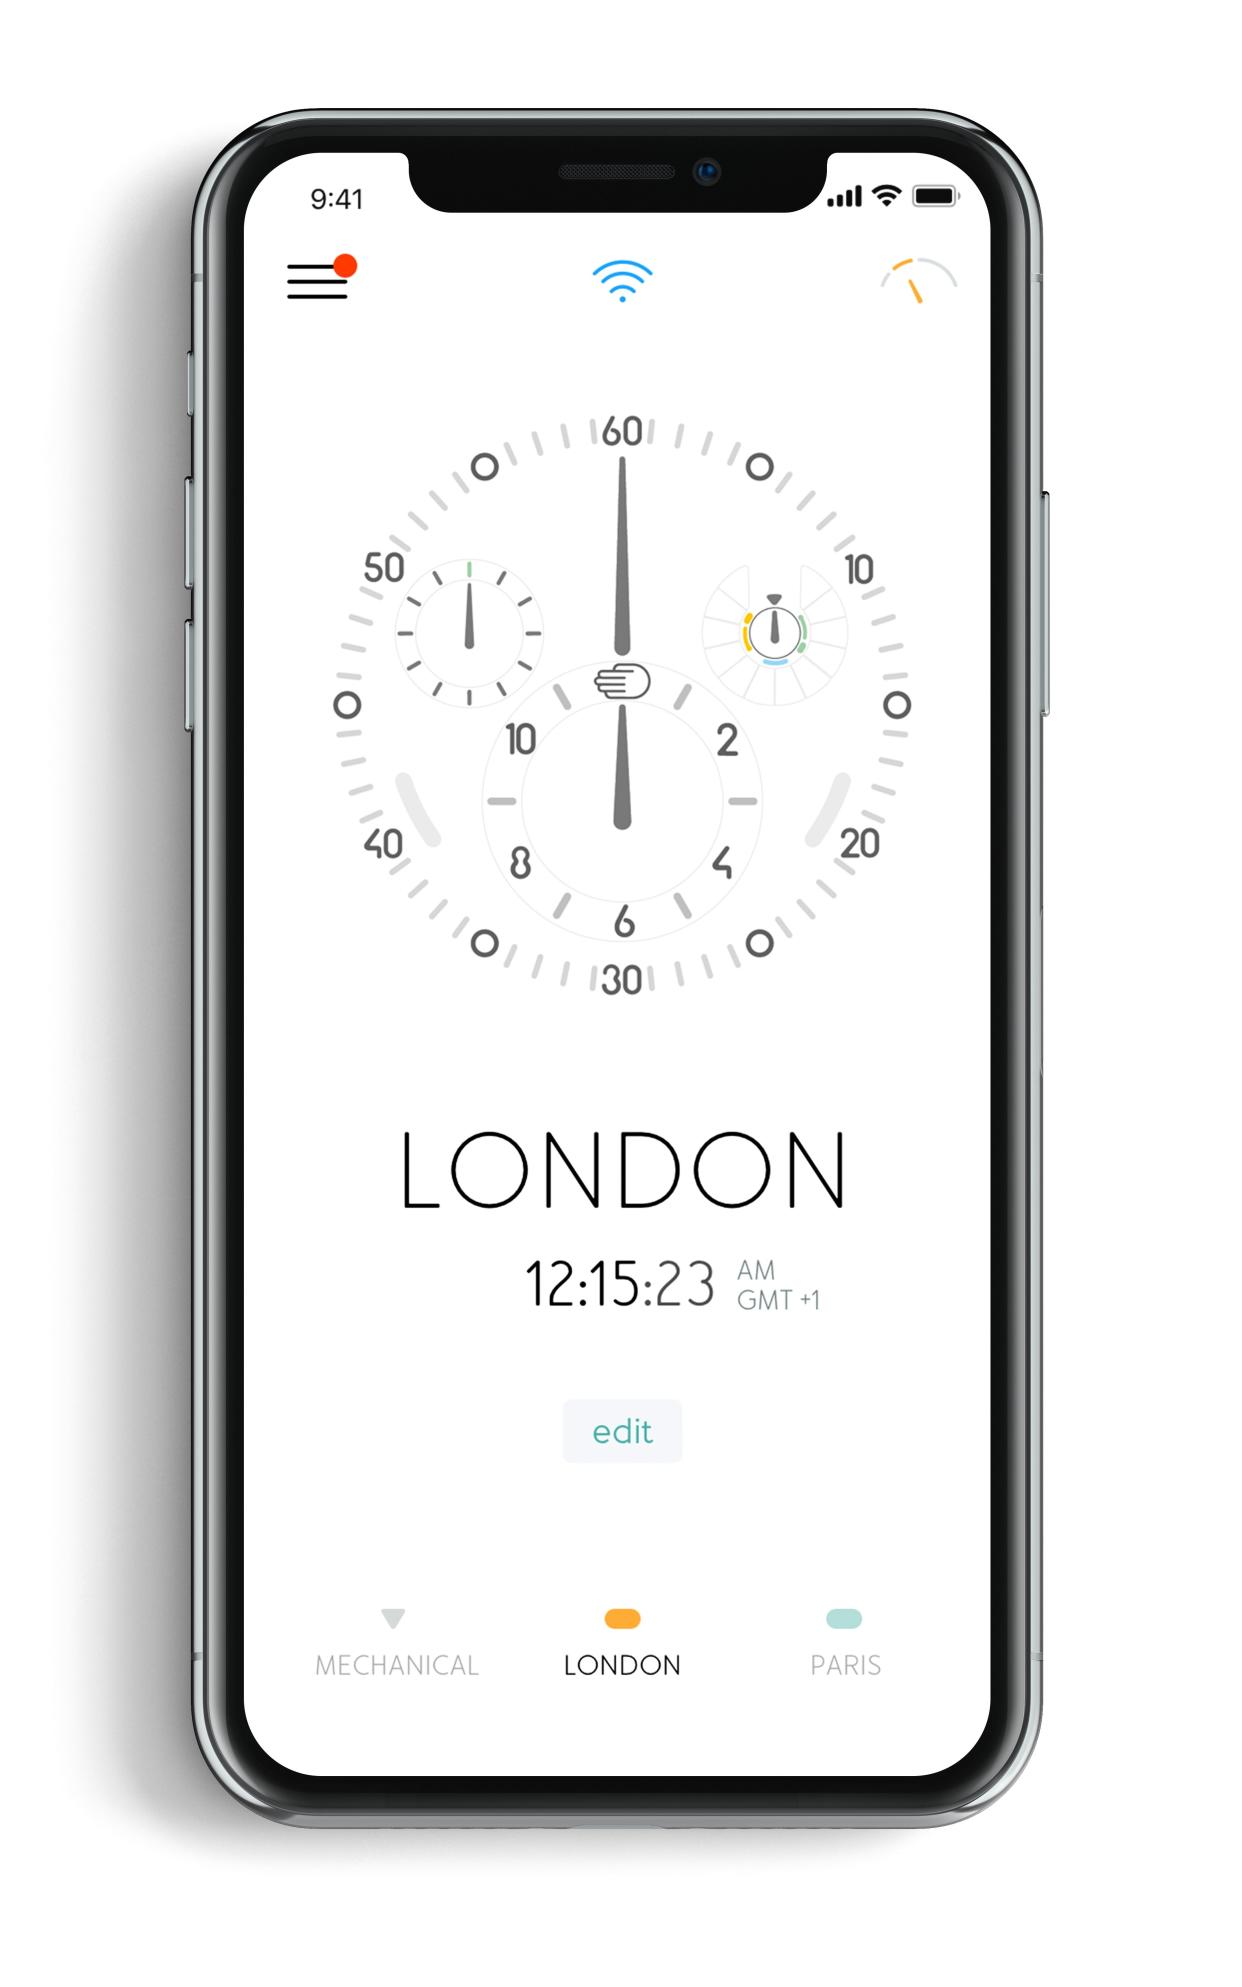 Using a Bluetooth connection, the Type 2 e-Crown connects to an app that sets the time automatically, detecting different time zones